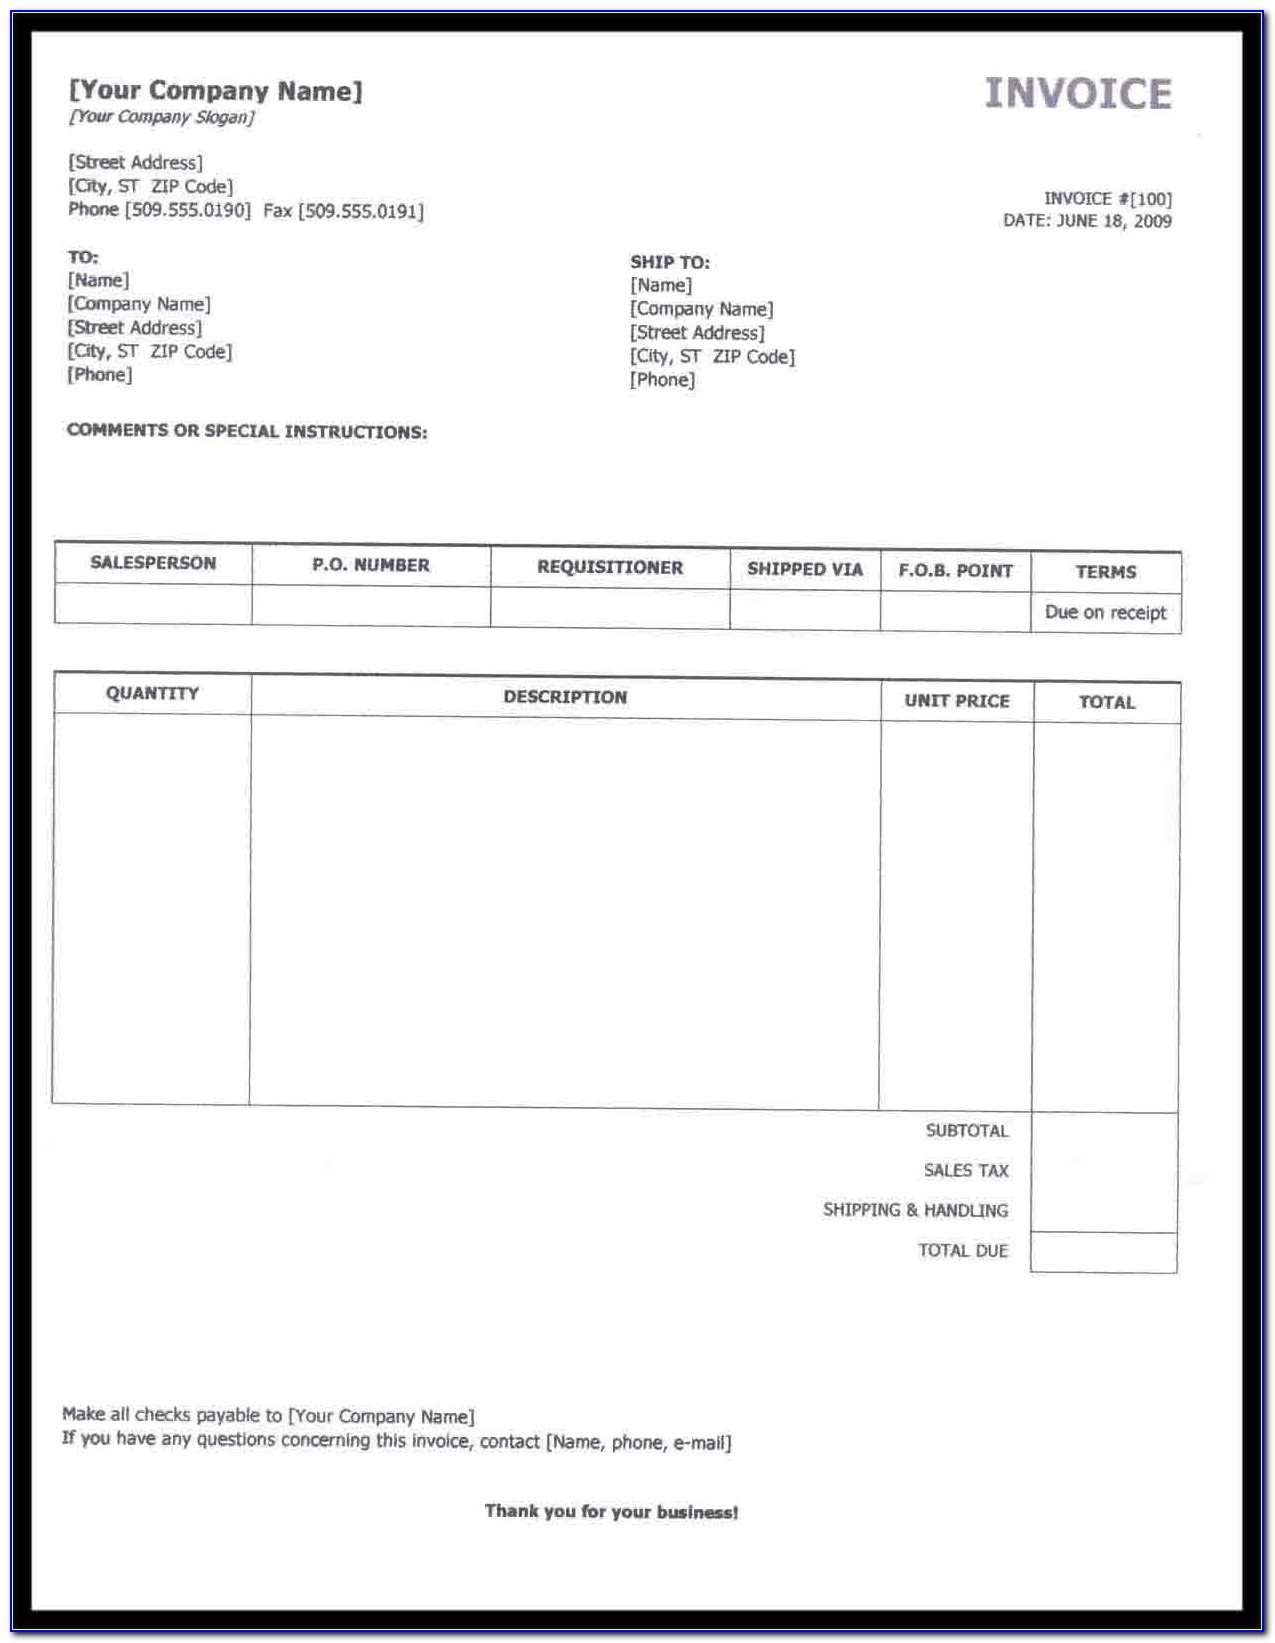 Basic Invoice Template Free Open Office